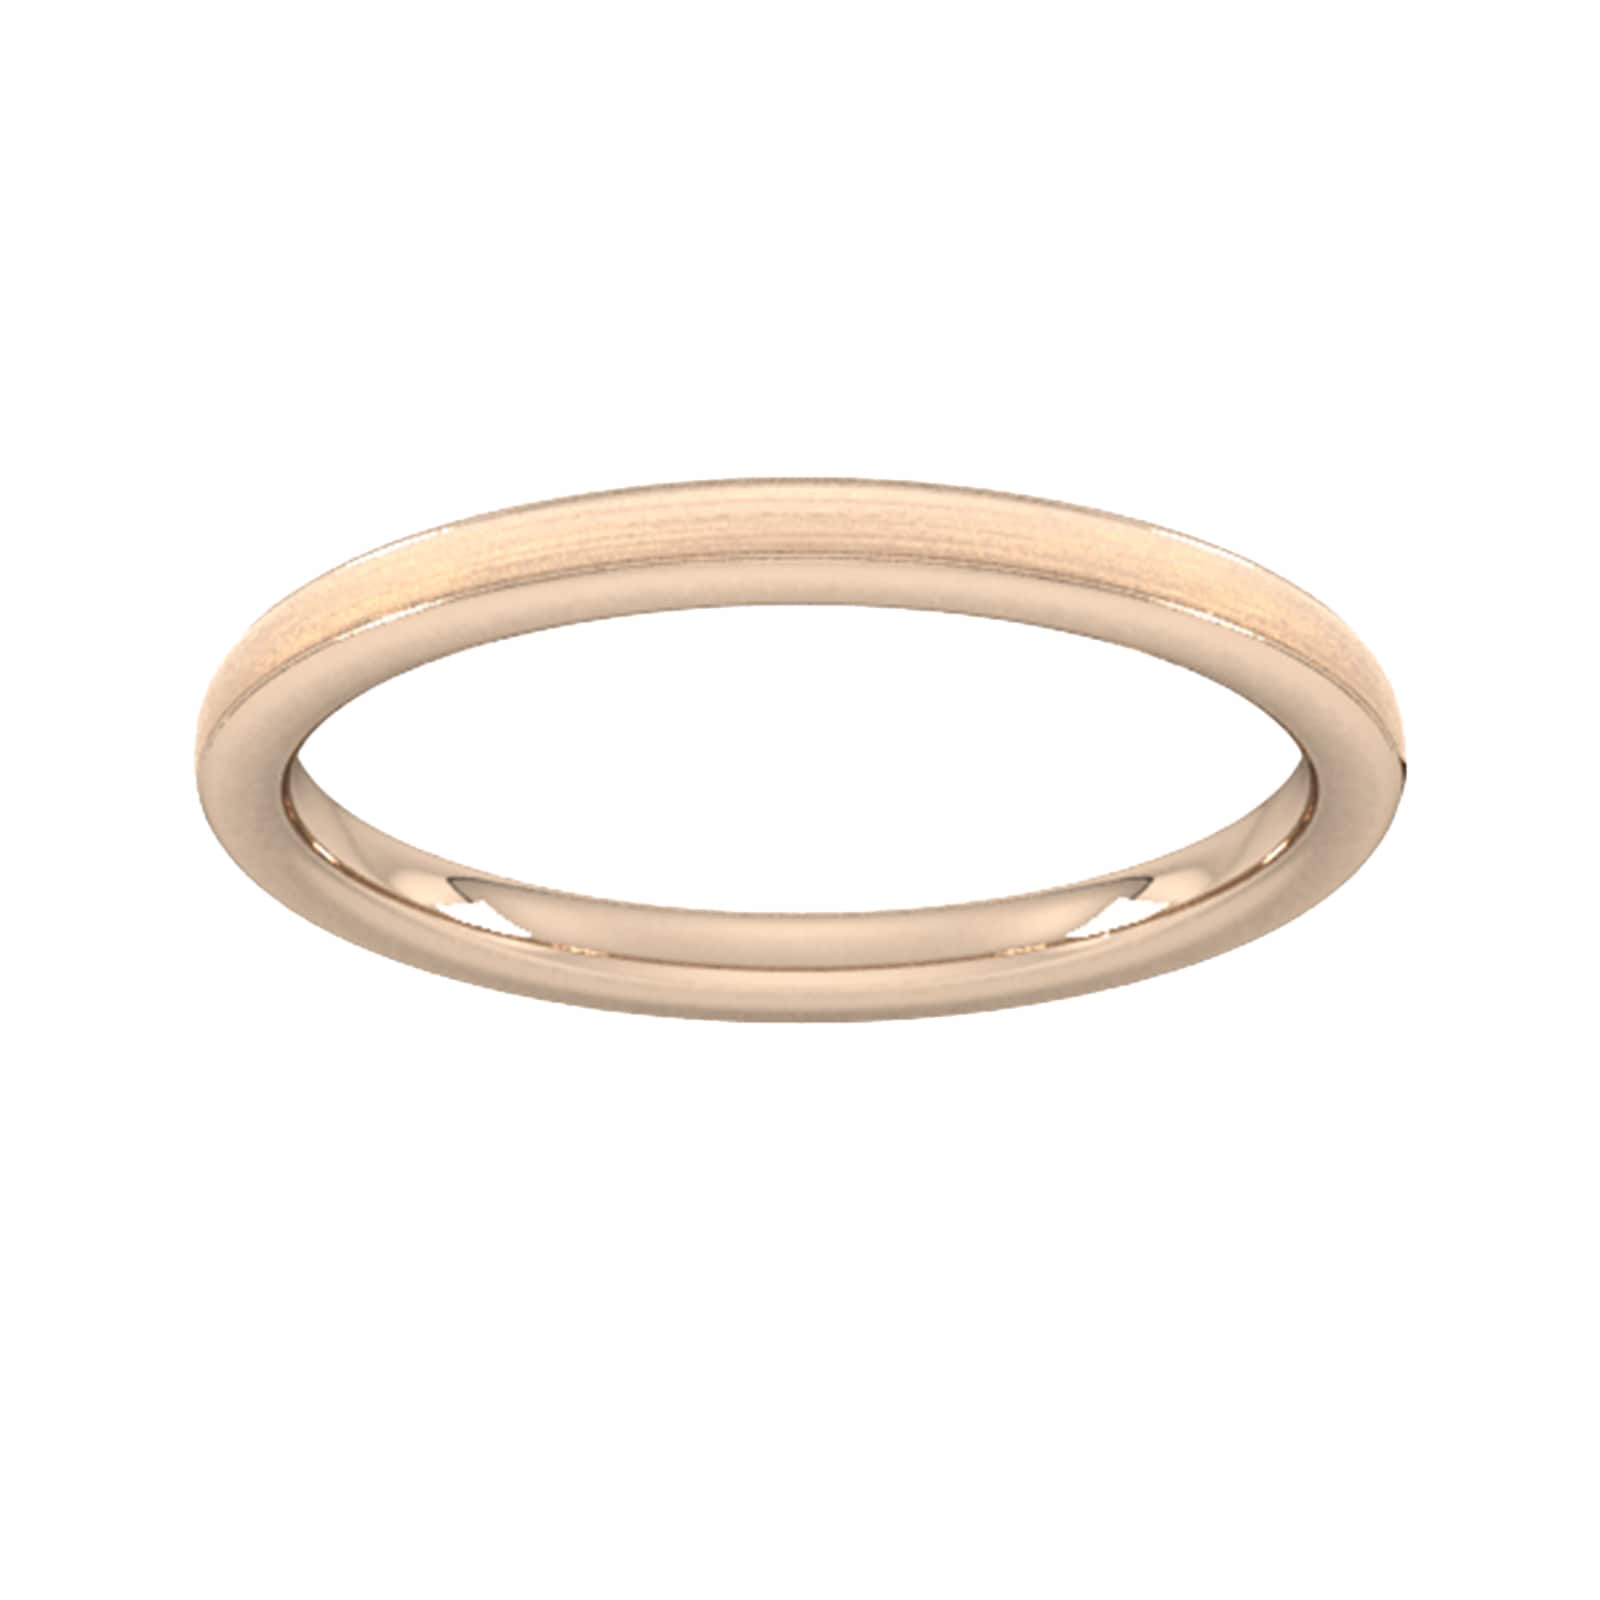 2mm Traditional Court Standard Matt Centre With Grooves Wedding Ring In 18 Carat Rose Gold - Ring Size X